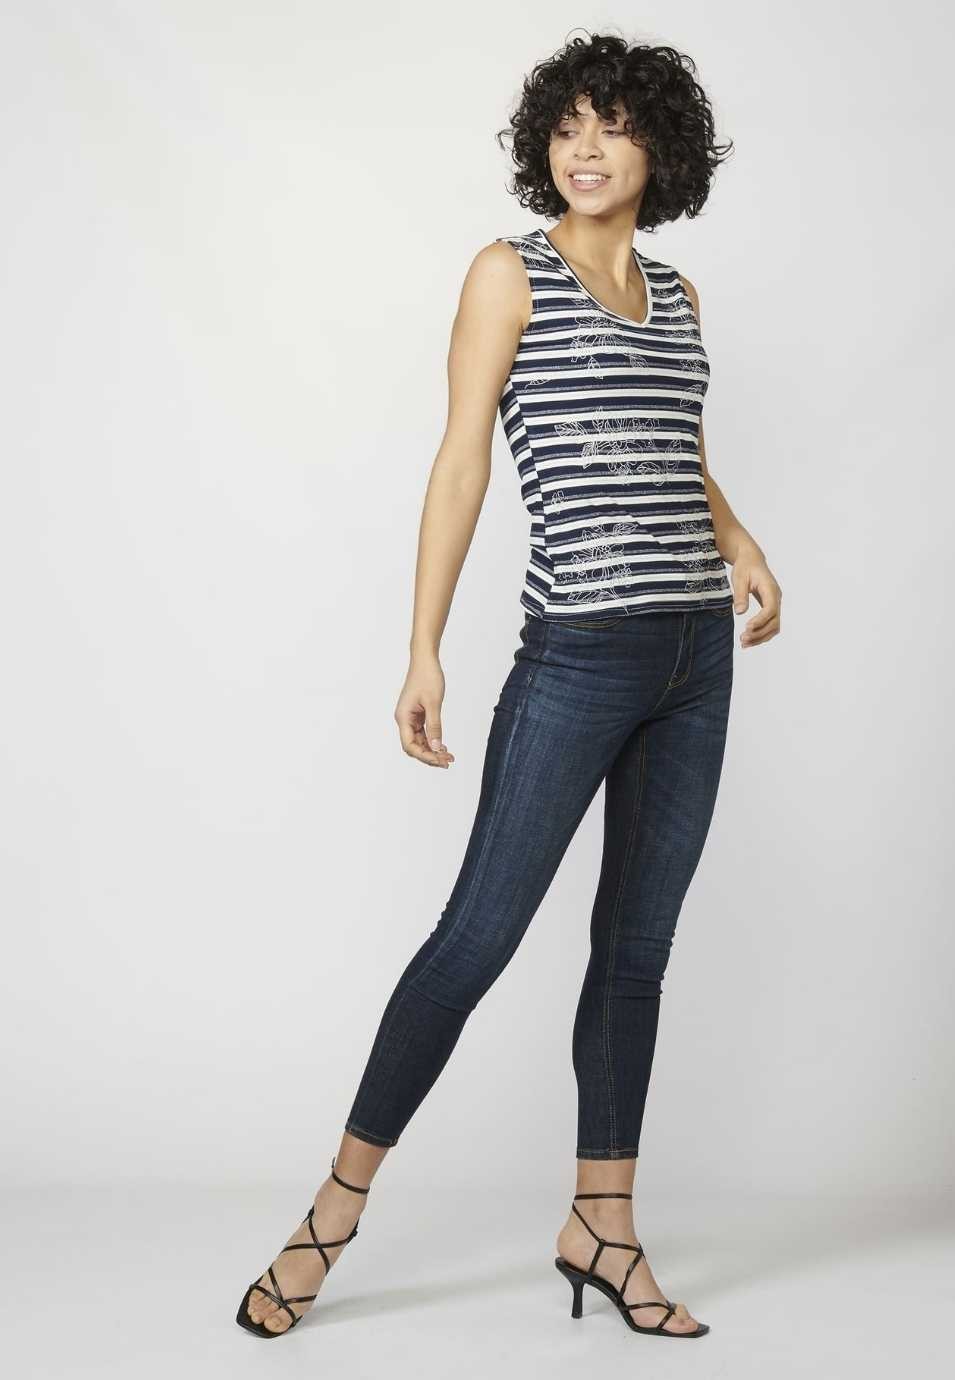 Women's Sailor-style V-Neck Tank Top with Embroidery on the Front